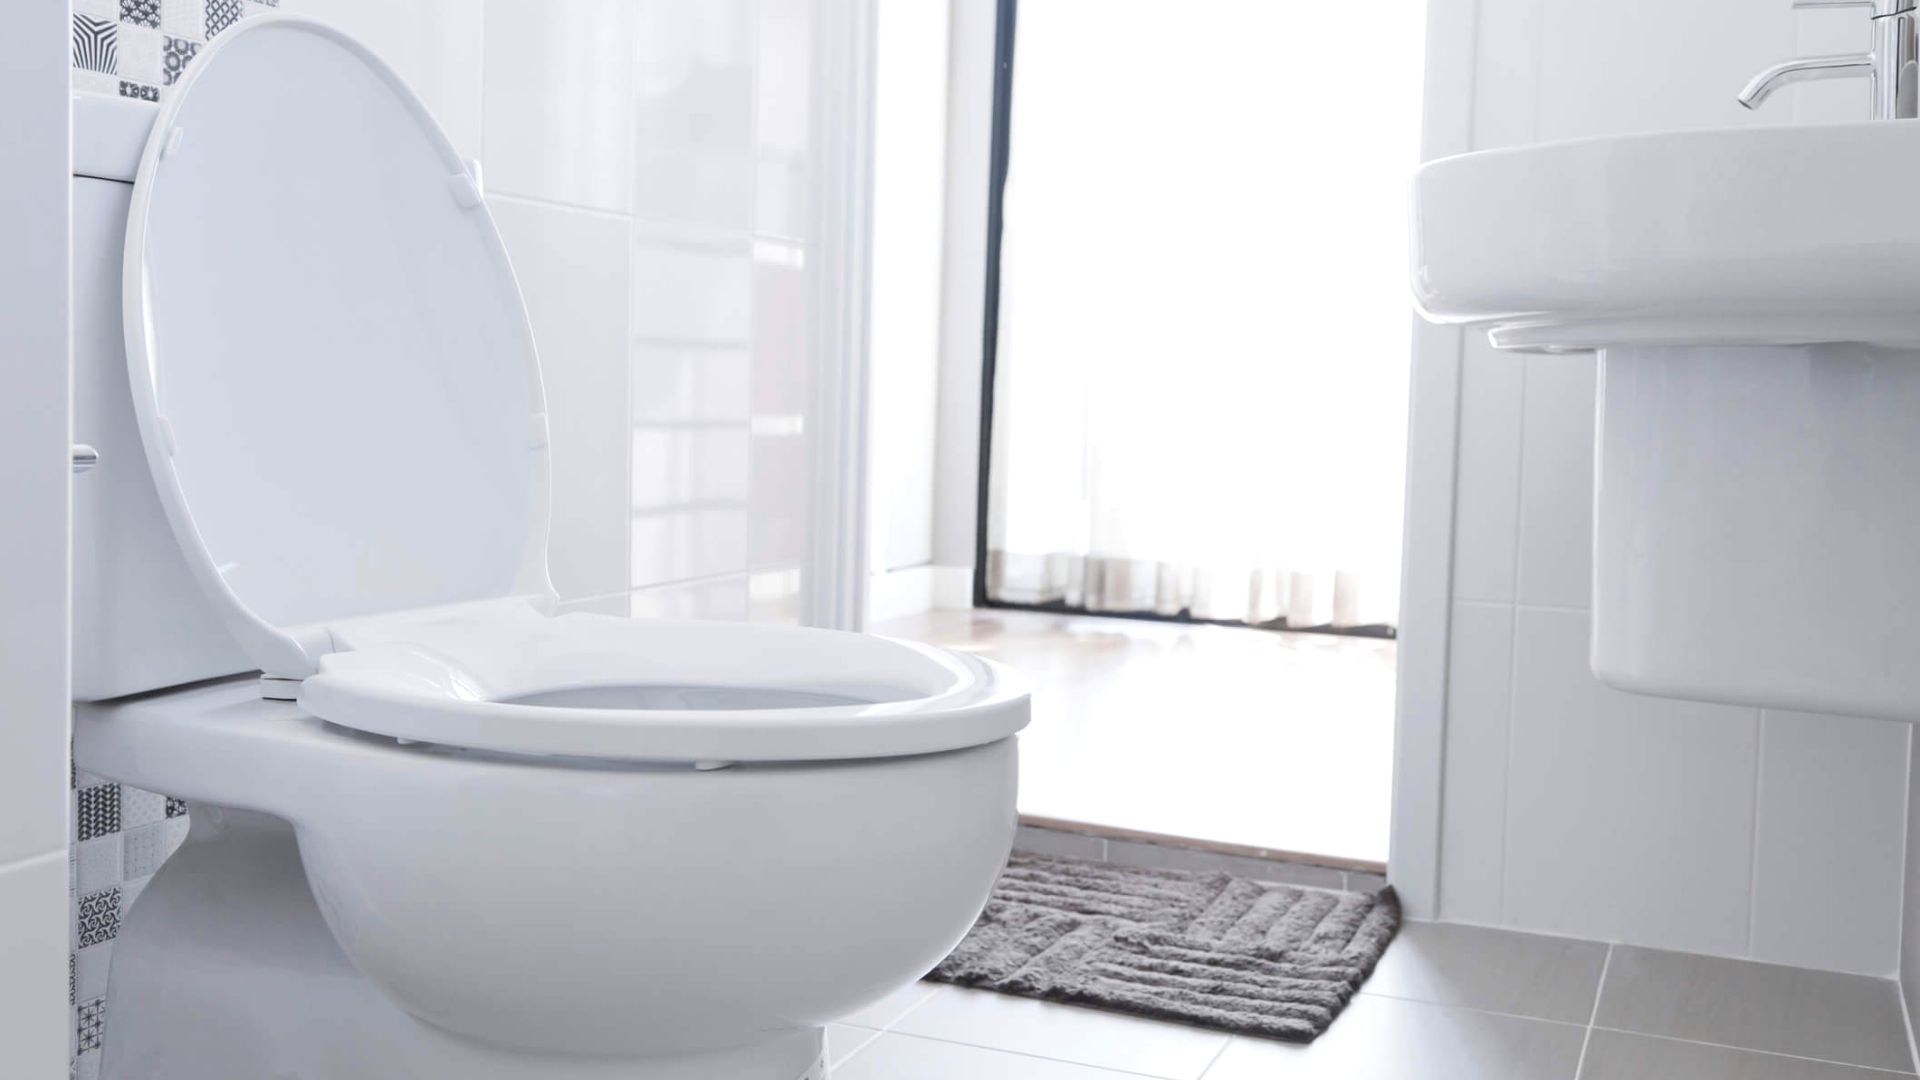 How To Stop A Running Toilet In 5 Steps! - Gold Coast Plumbing Company